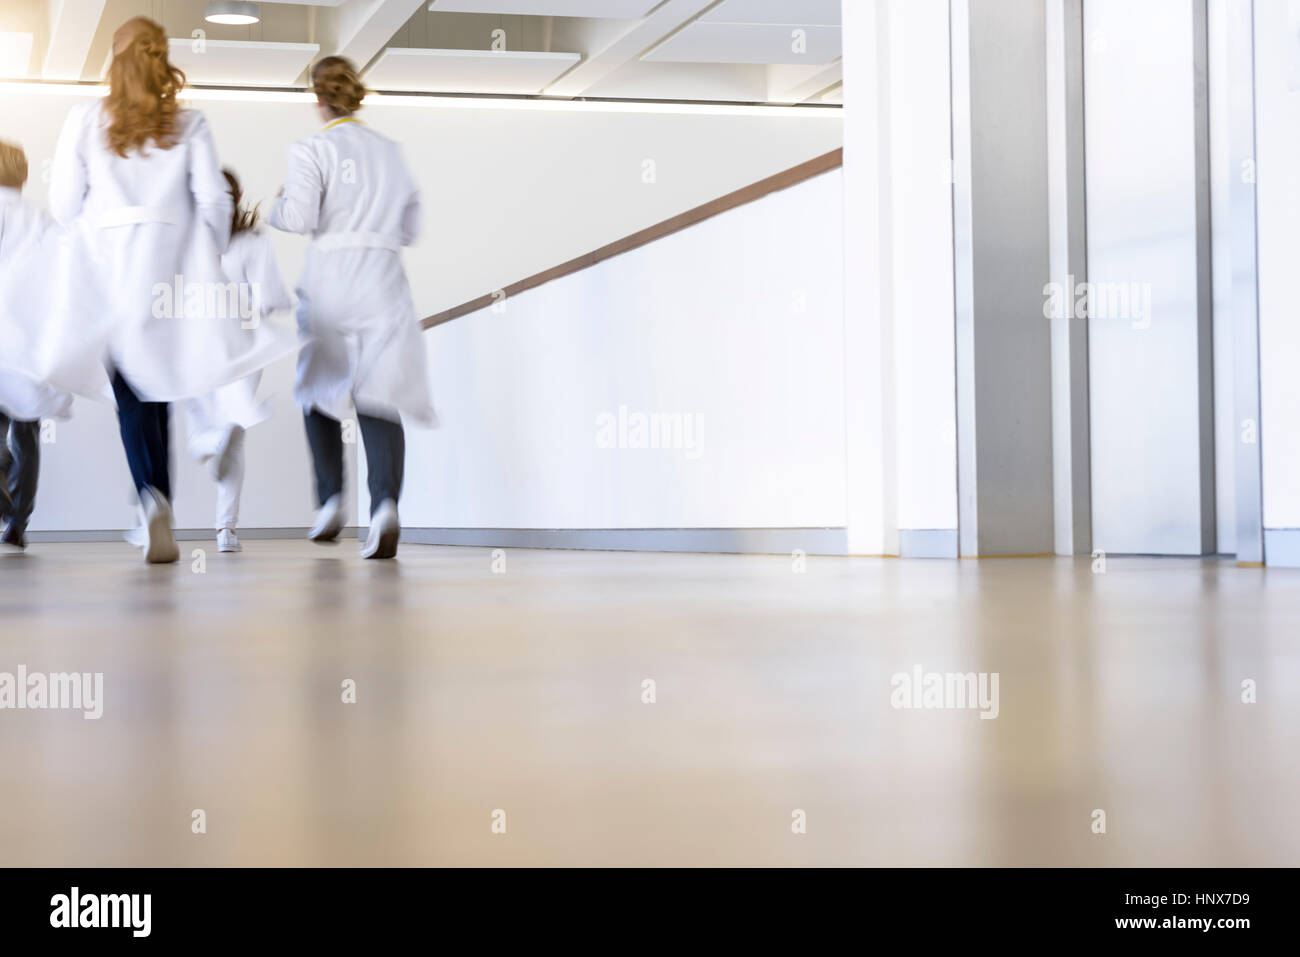 Rear view of male and female doctors running in hospital corridor Stock Photo